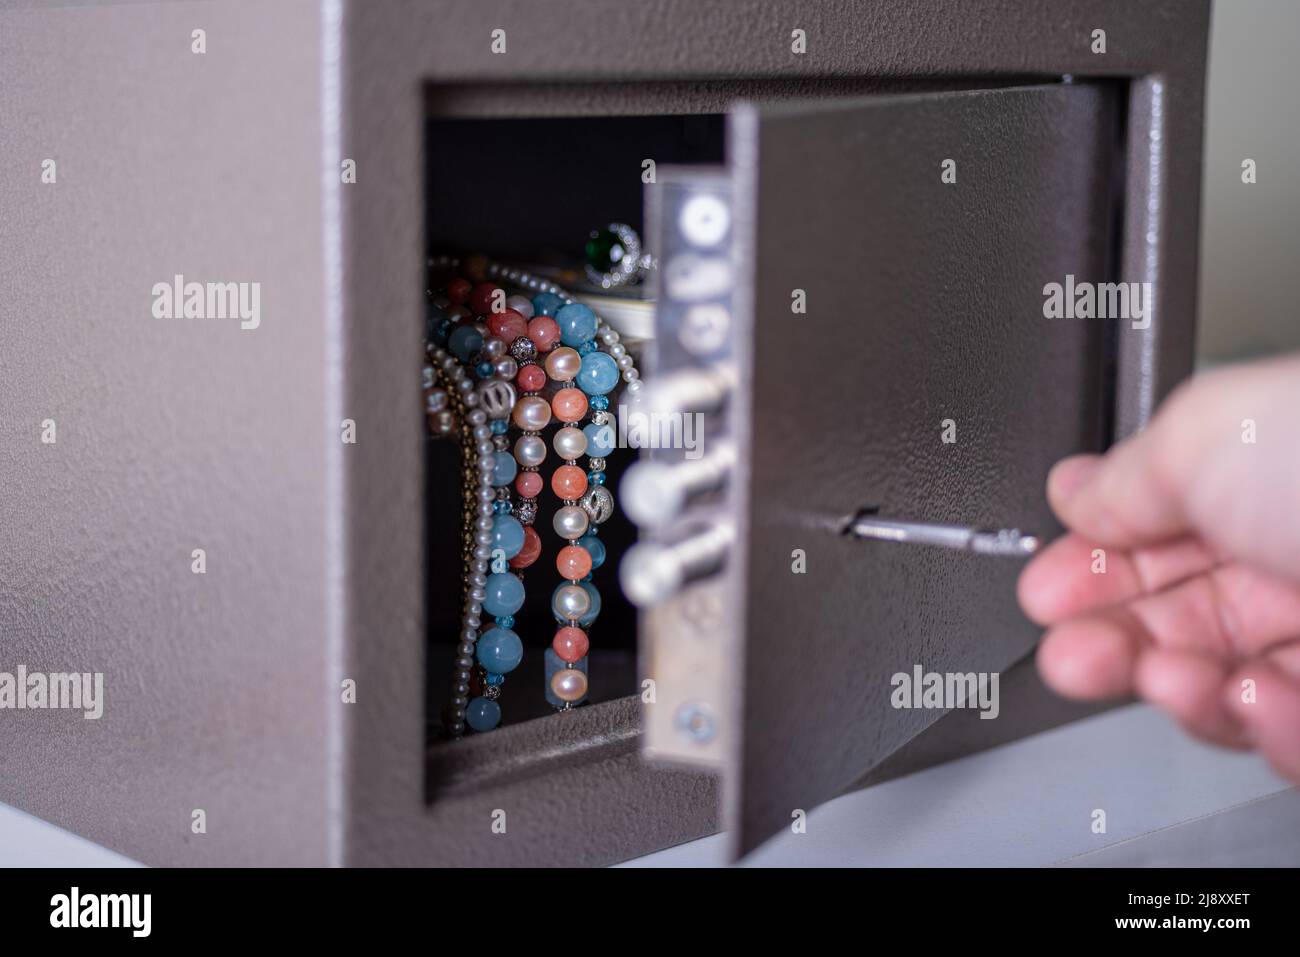 Money and jewelry in an open safe on the table. There is money and beads in the open safe. Stock Photo